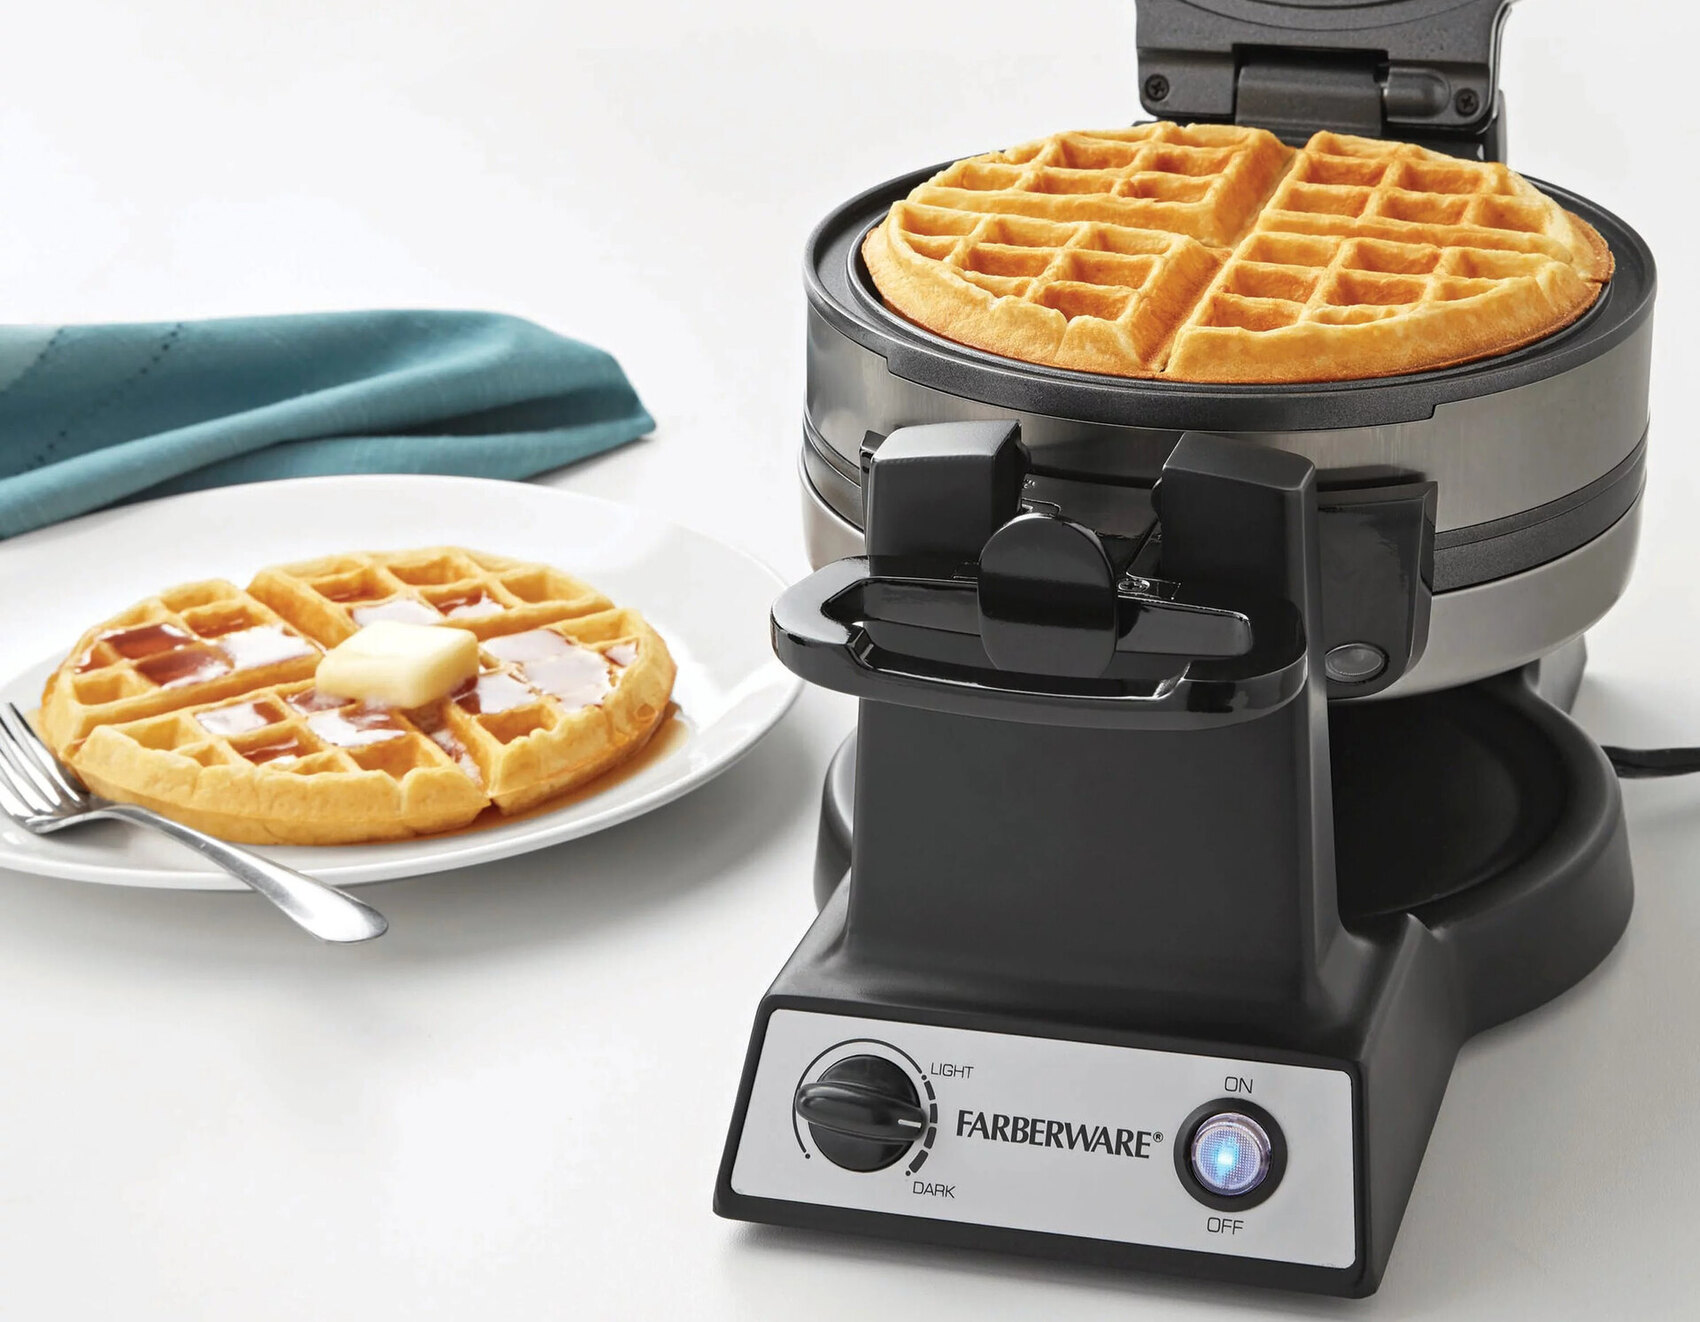 How Long Does It Take Waffles To Cook In A Farberware Waffle Iron?